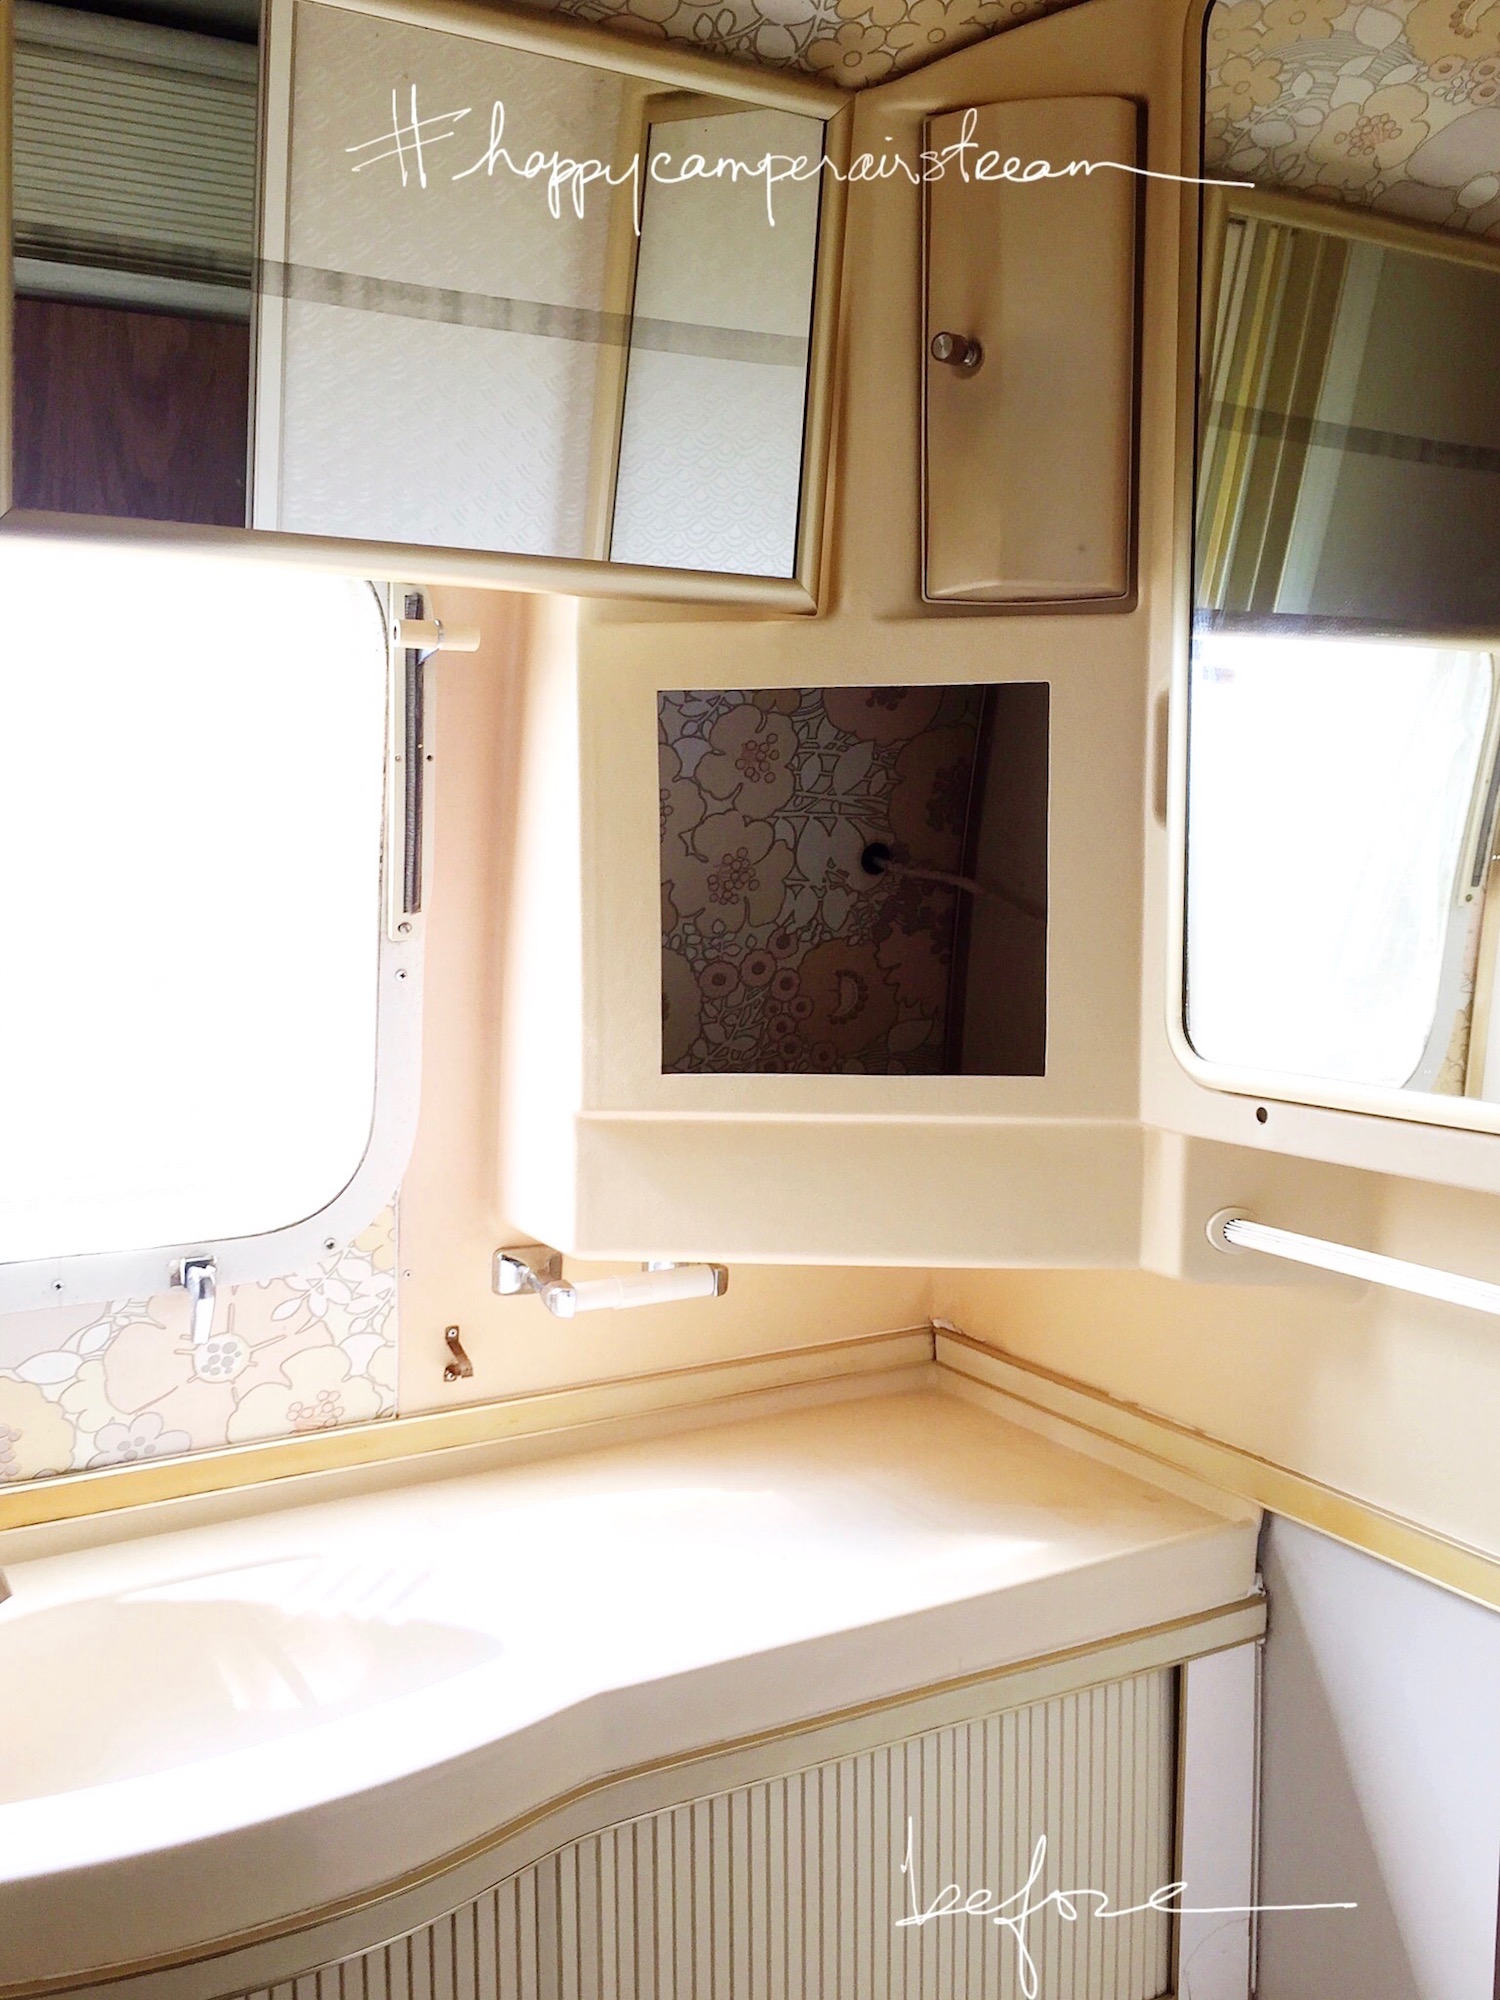 The before photo of a 1976 vintage airstream, transformed with white paint, gold accents and gorgeous home decor. A must see! Click on the photo to see more. Airstream by Lynne Knowlton from Design The Life You Want to Live www.lynneknowlton.com